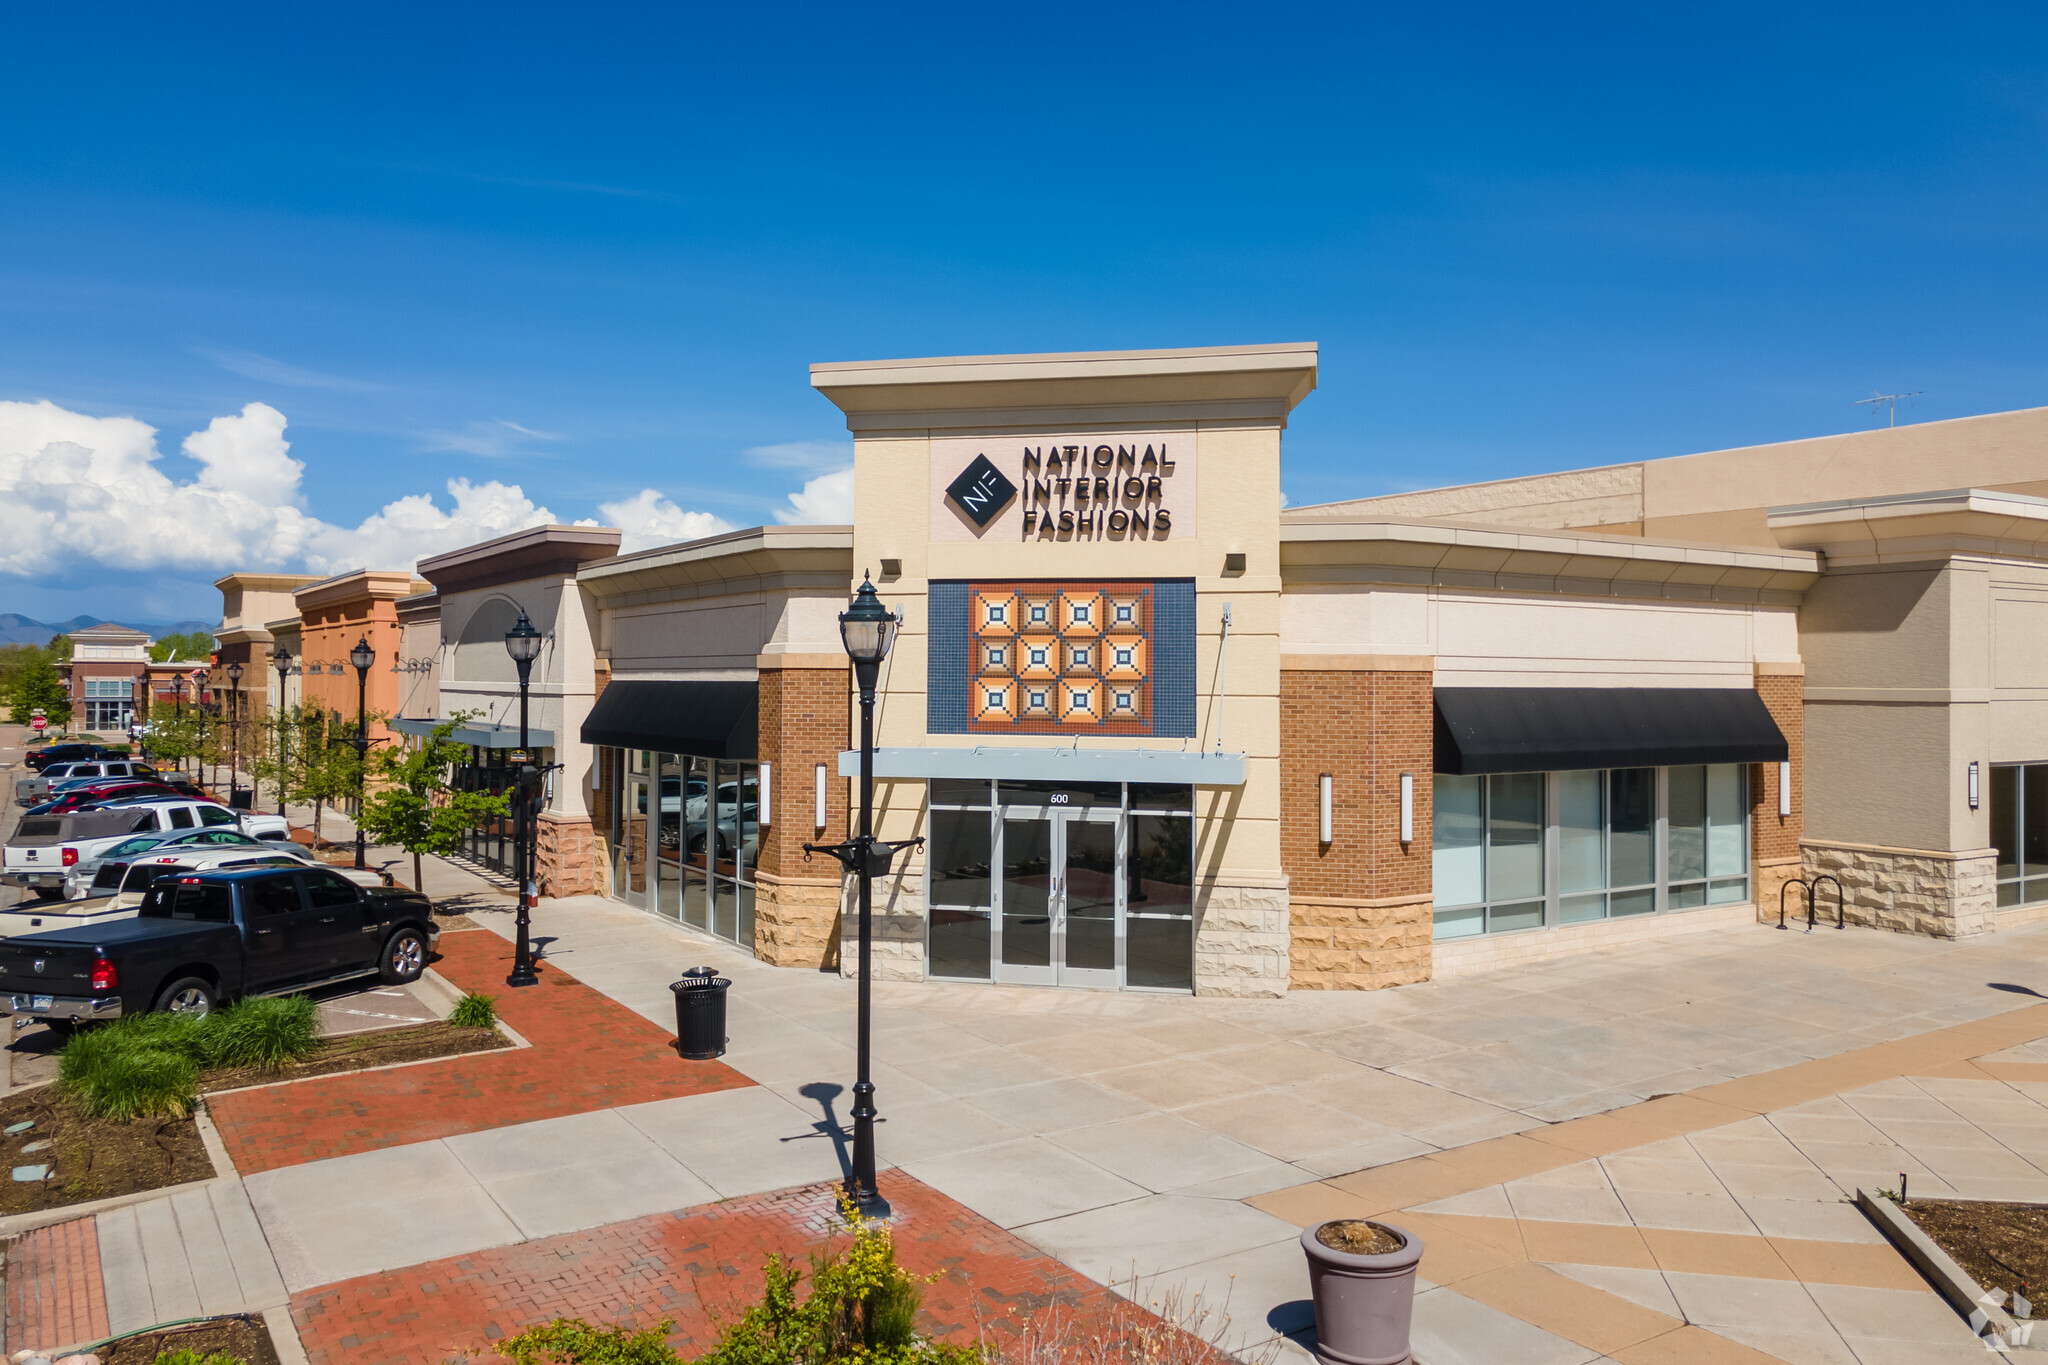 7-Year Lease Executed at The Streets at Southglenn in Centennial, CO.